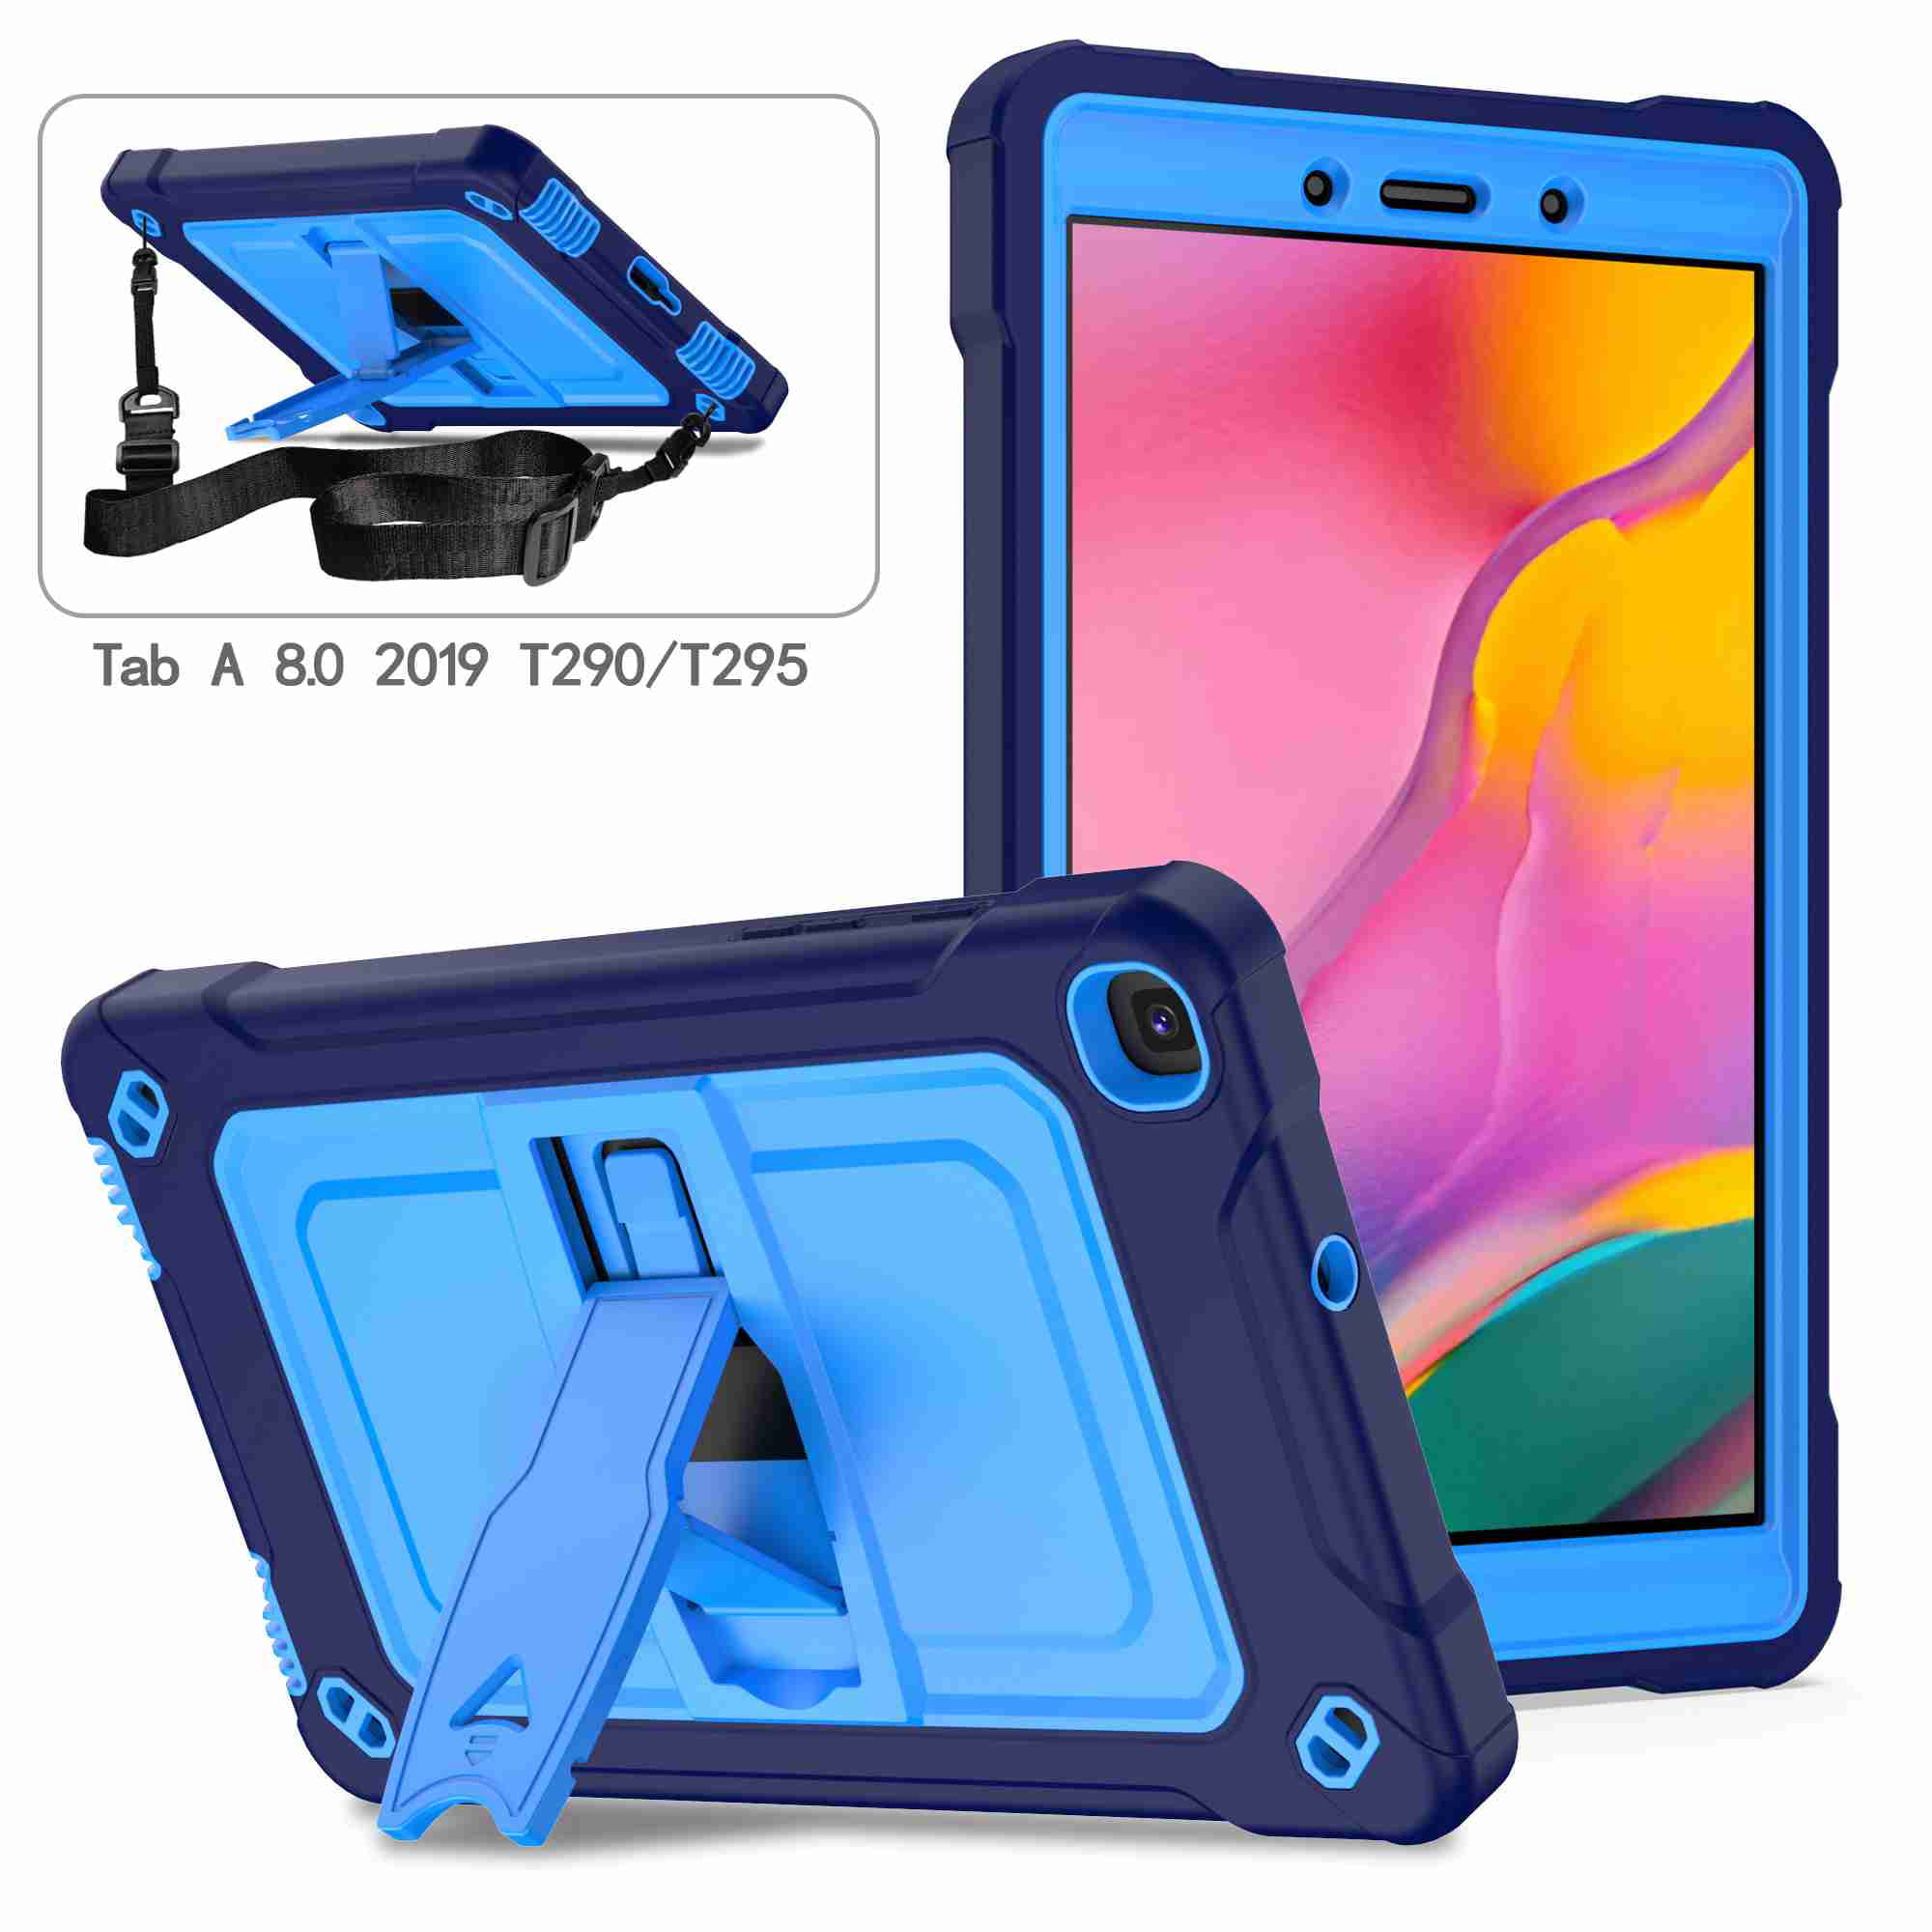 Samsung Galaxy Tab A 8.0 Case 2019 for Kids Galaxy Tab A 8.0 Case SM-T290/T295/T297 with Kickstand & Screen Protector Blosomeet Shockproof Protective Cover w/Hand Shoulder Strap Green 